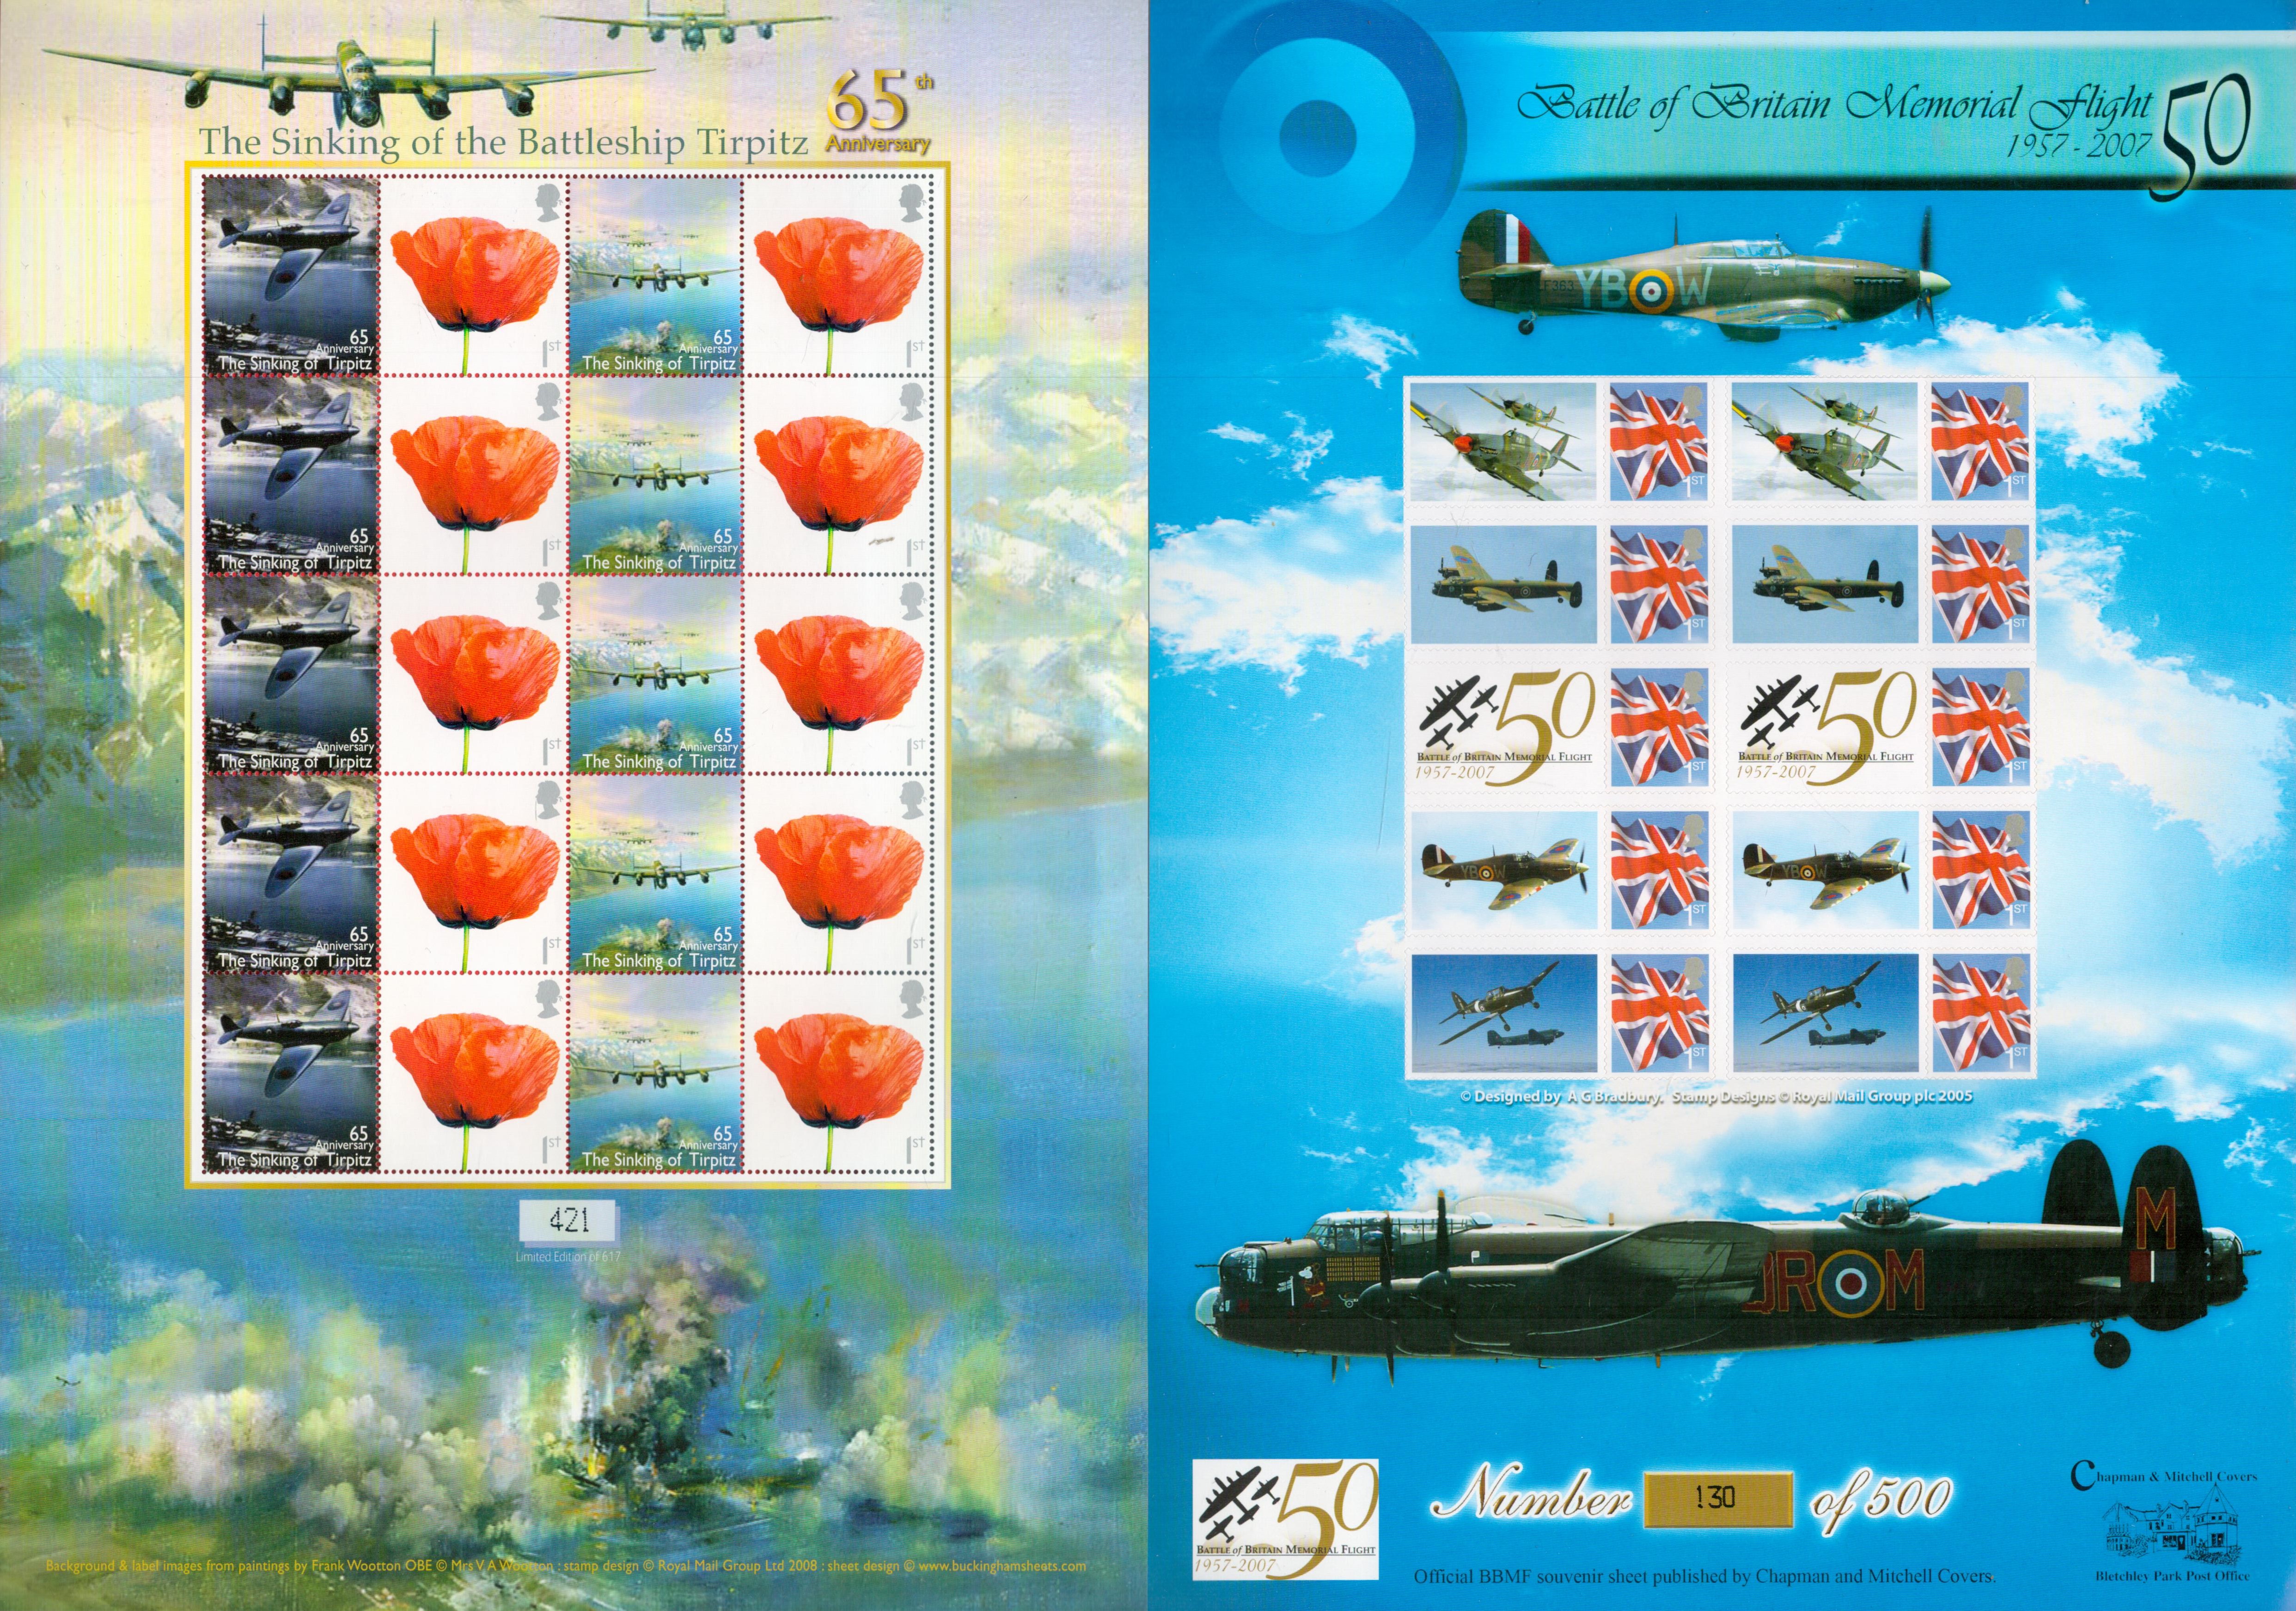 WW2 Dambusters and Battle of Britain Collection of Mint Stamp Sheets. 5 Sheets of 10 Stamps. All